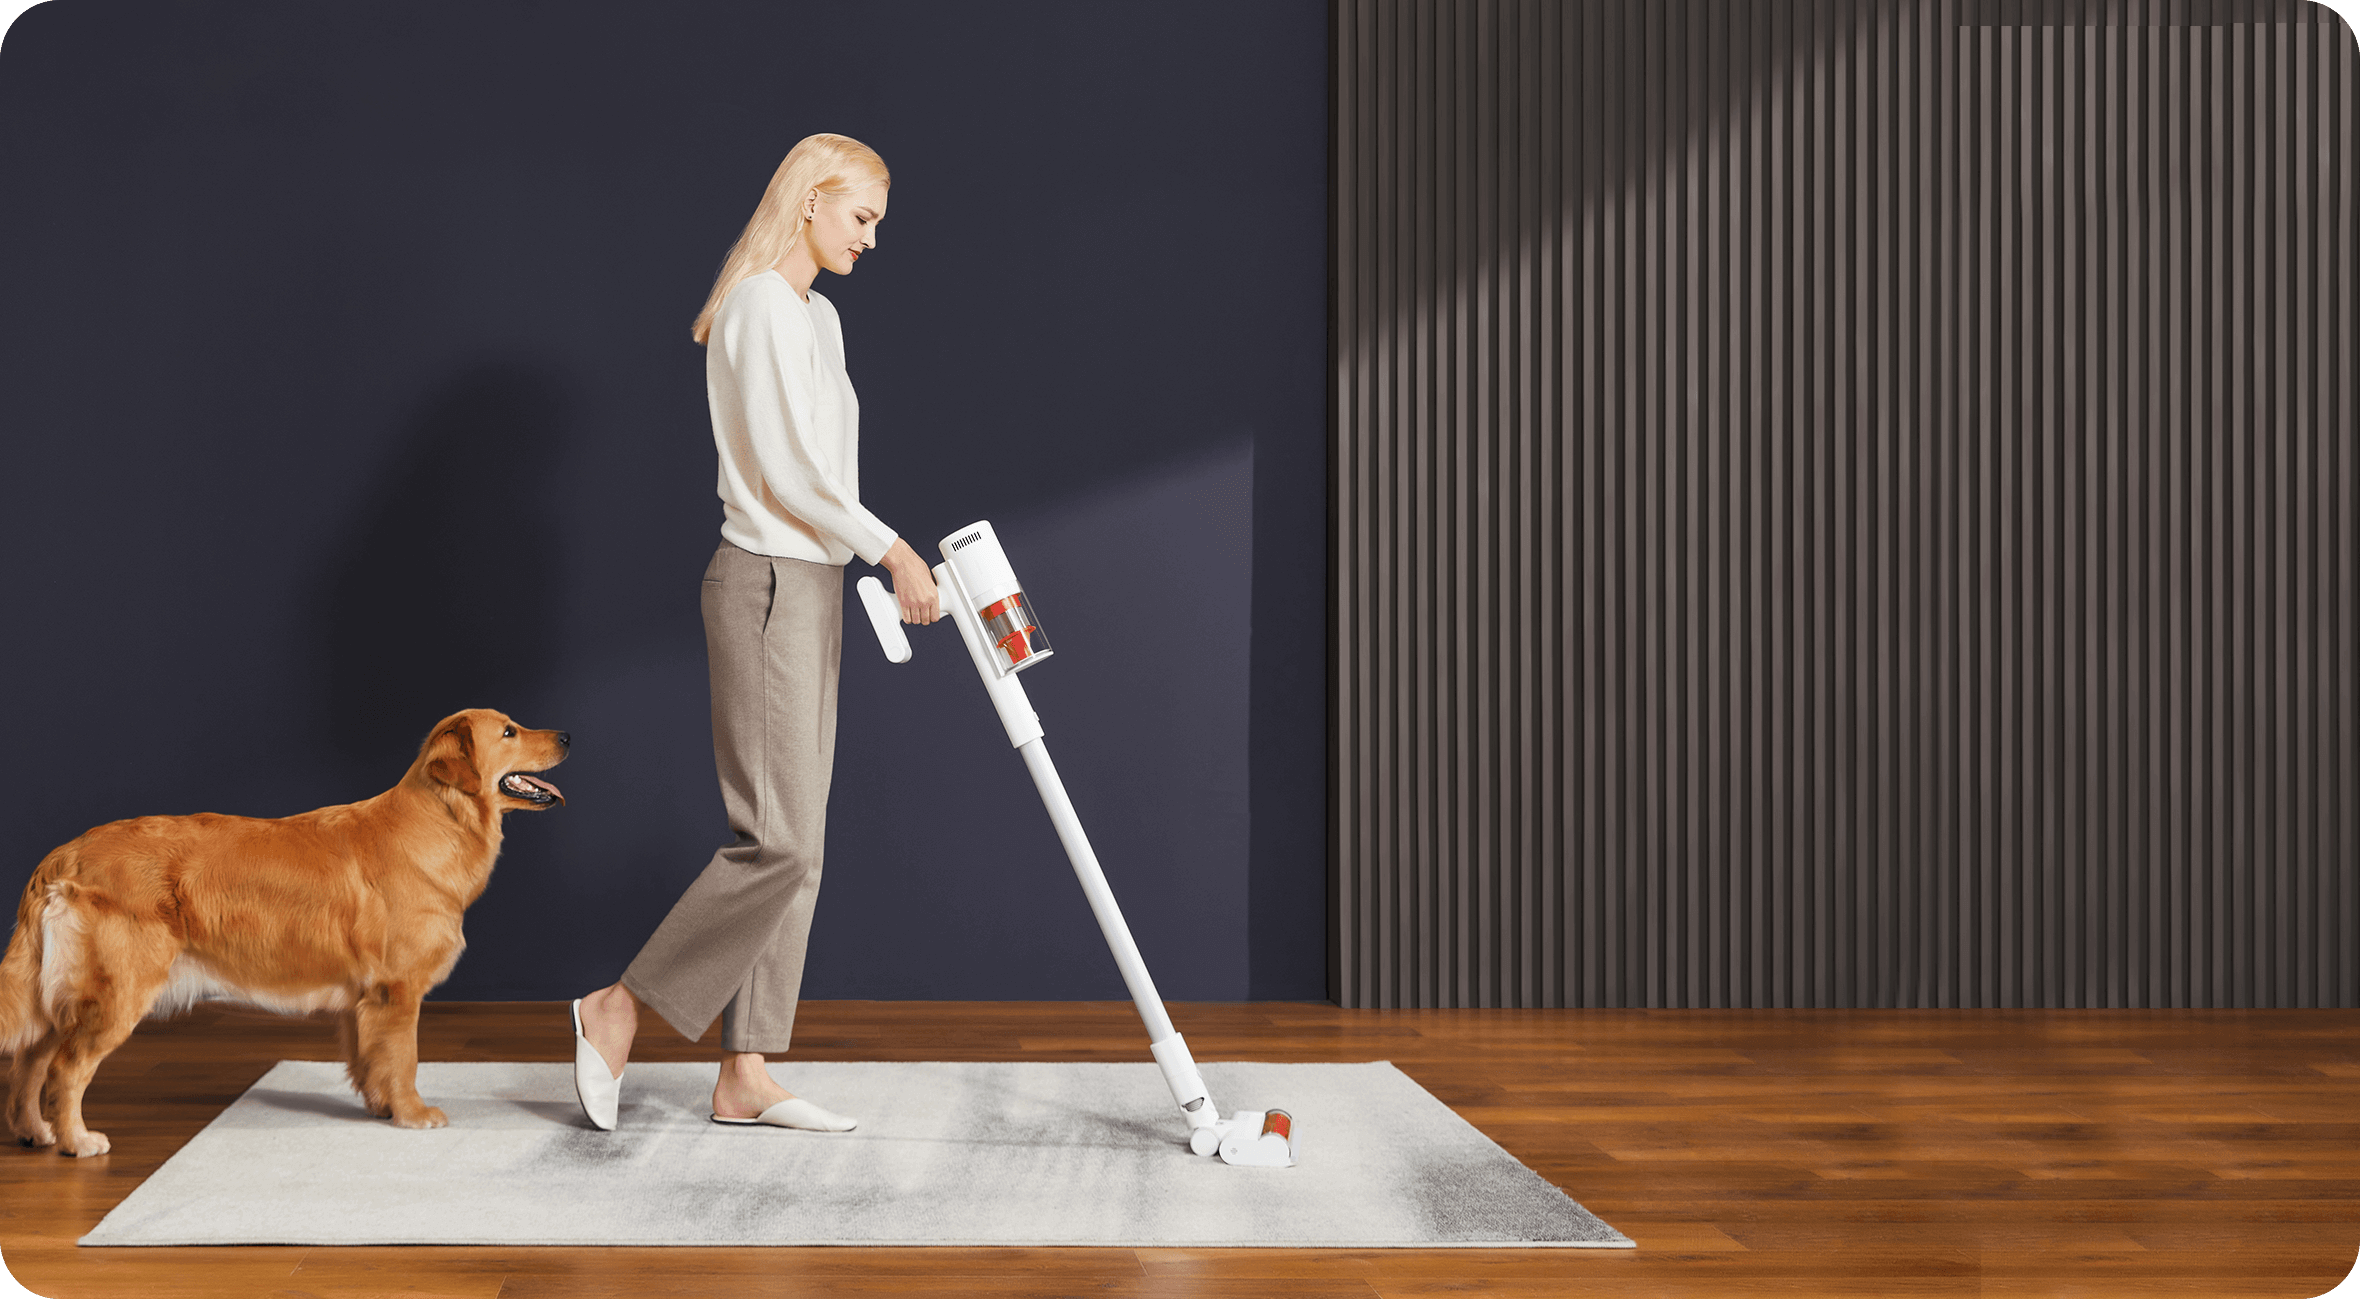 Xiaomi Vacuum Cleaner G11 is also suitable for households with animals